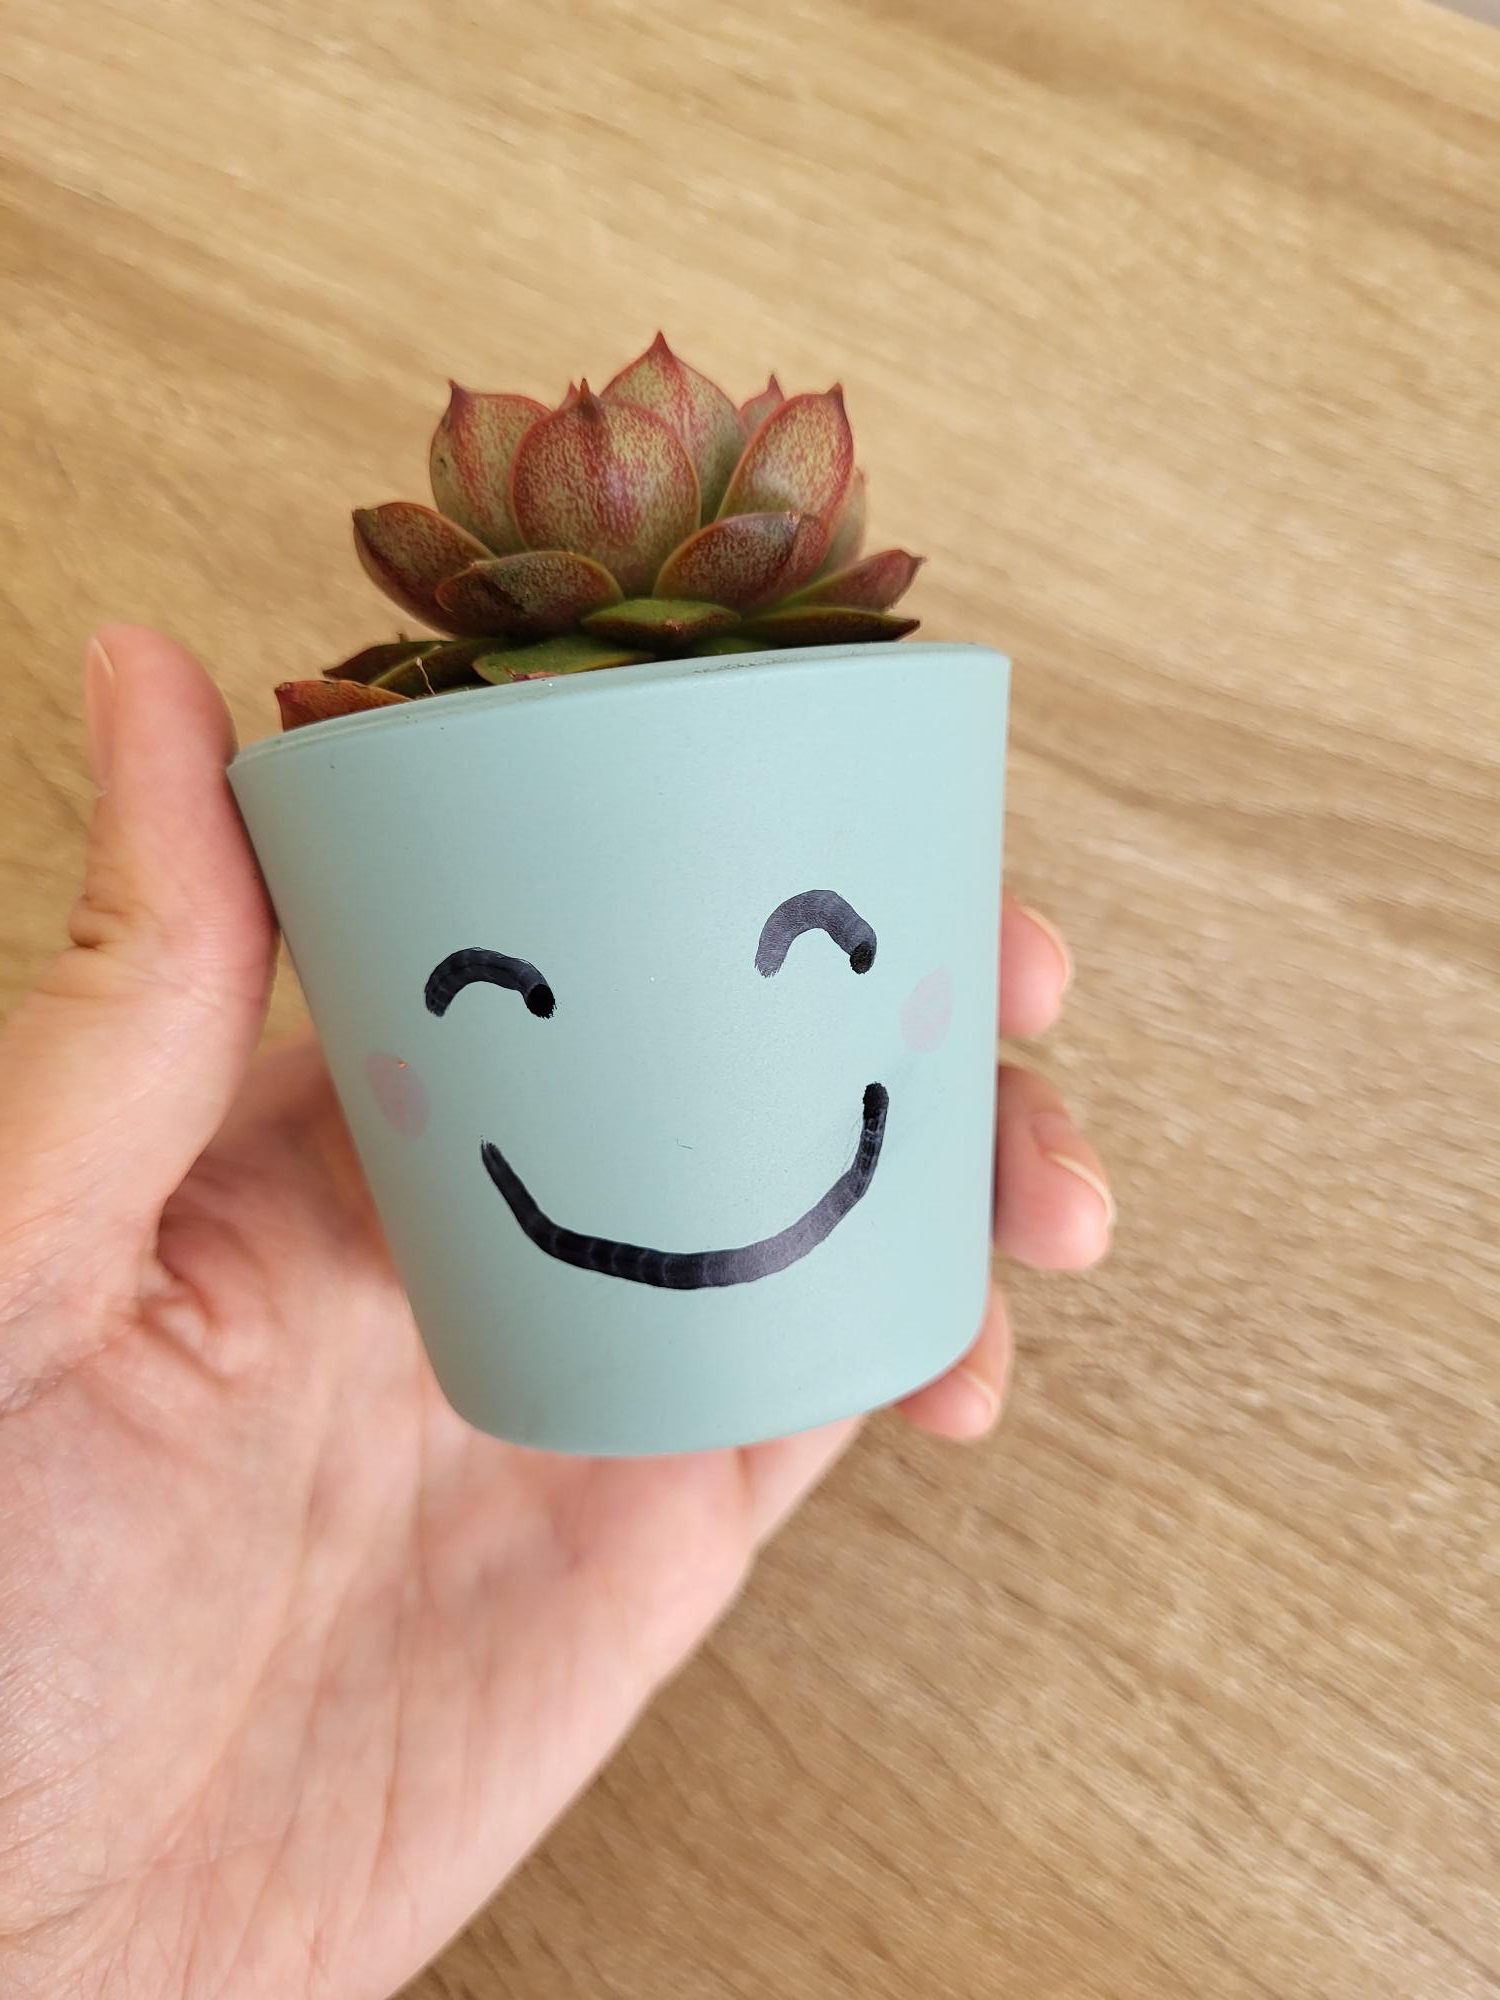 A hand holding a small succulent plant in a decorated pot